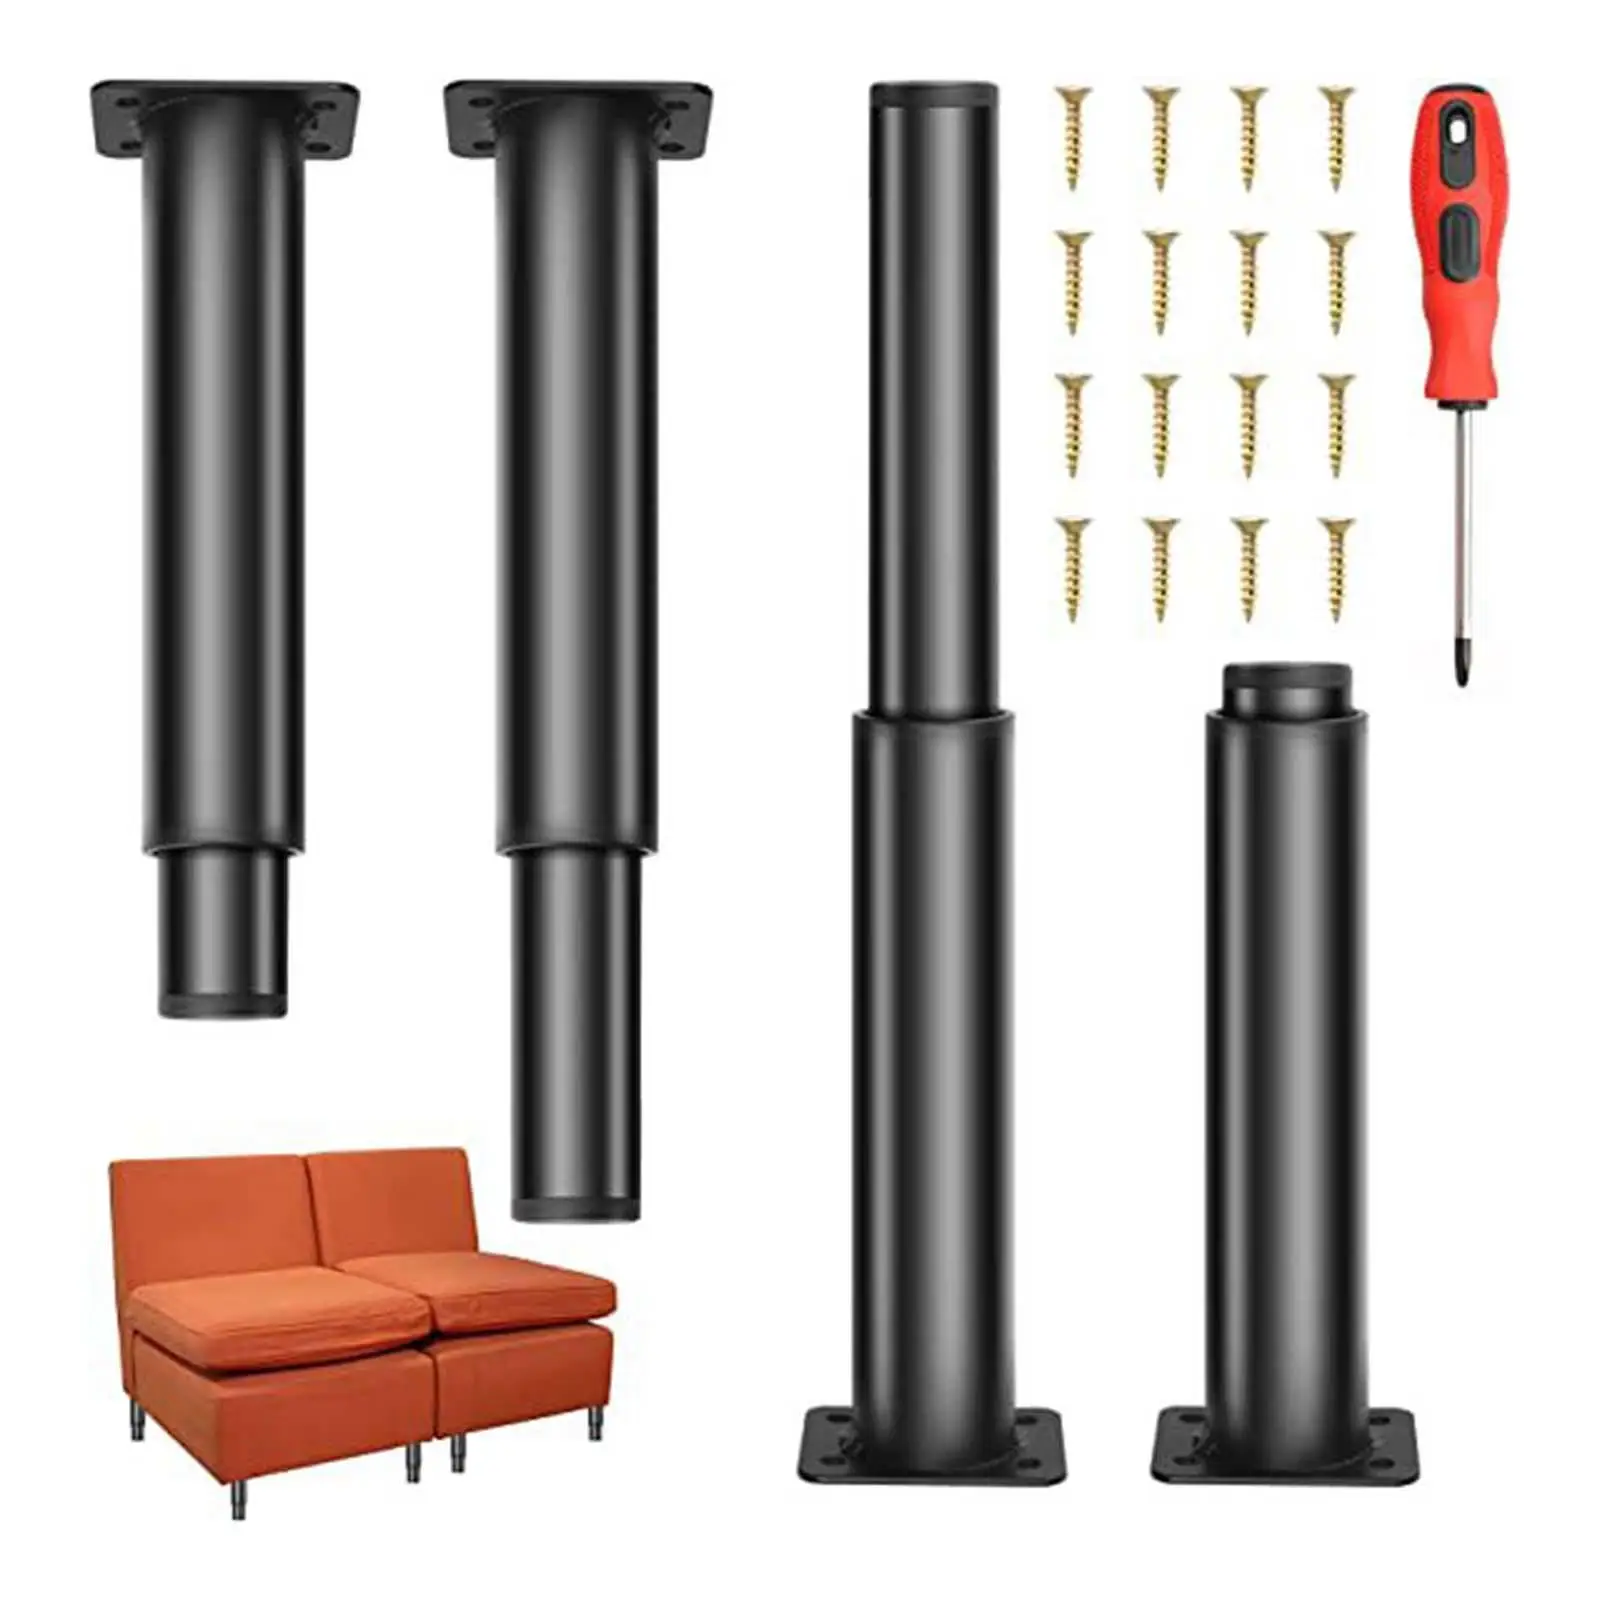 4x Adjustable Height Replacement Leg Black Heavy Duty Bed Frame Fixed Support Feet for Desk Bed Cabinet TV Stand Coffee Table